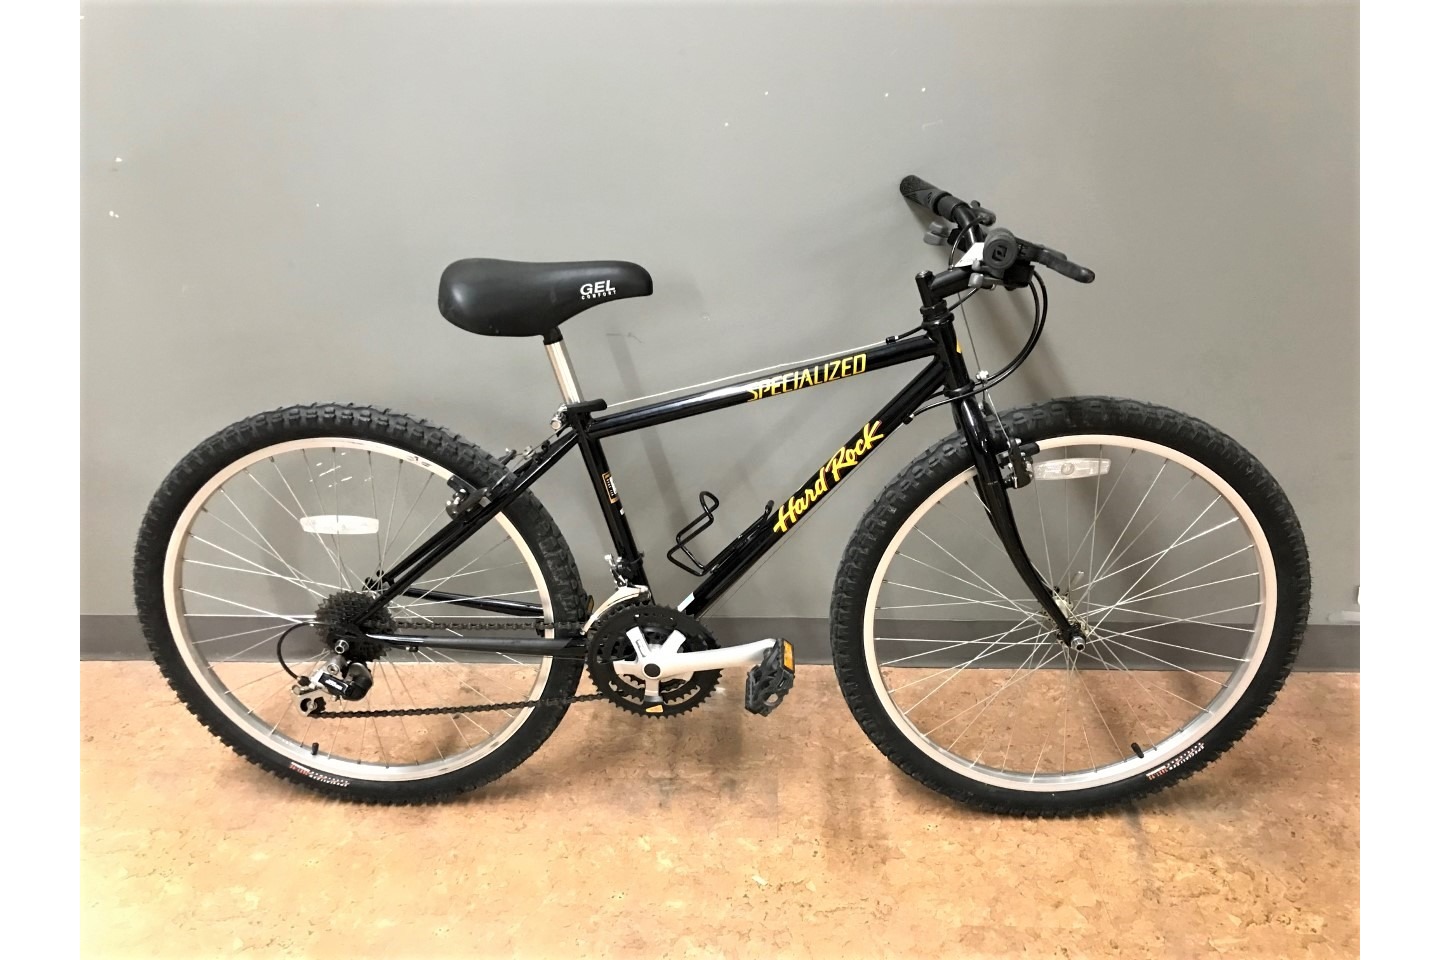 USED Specialized Hardrock small black